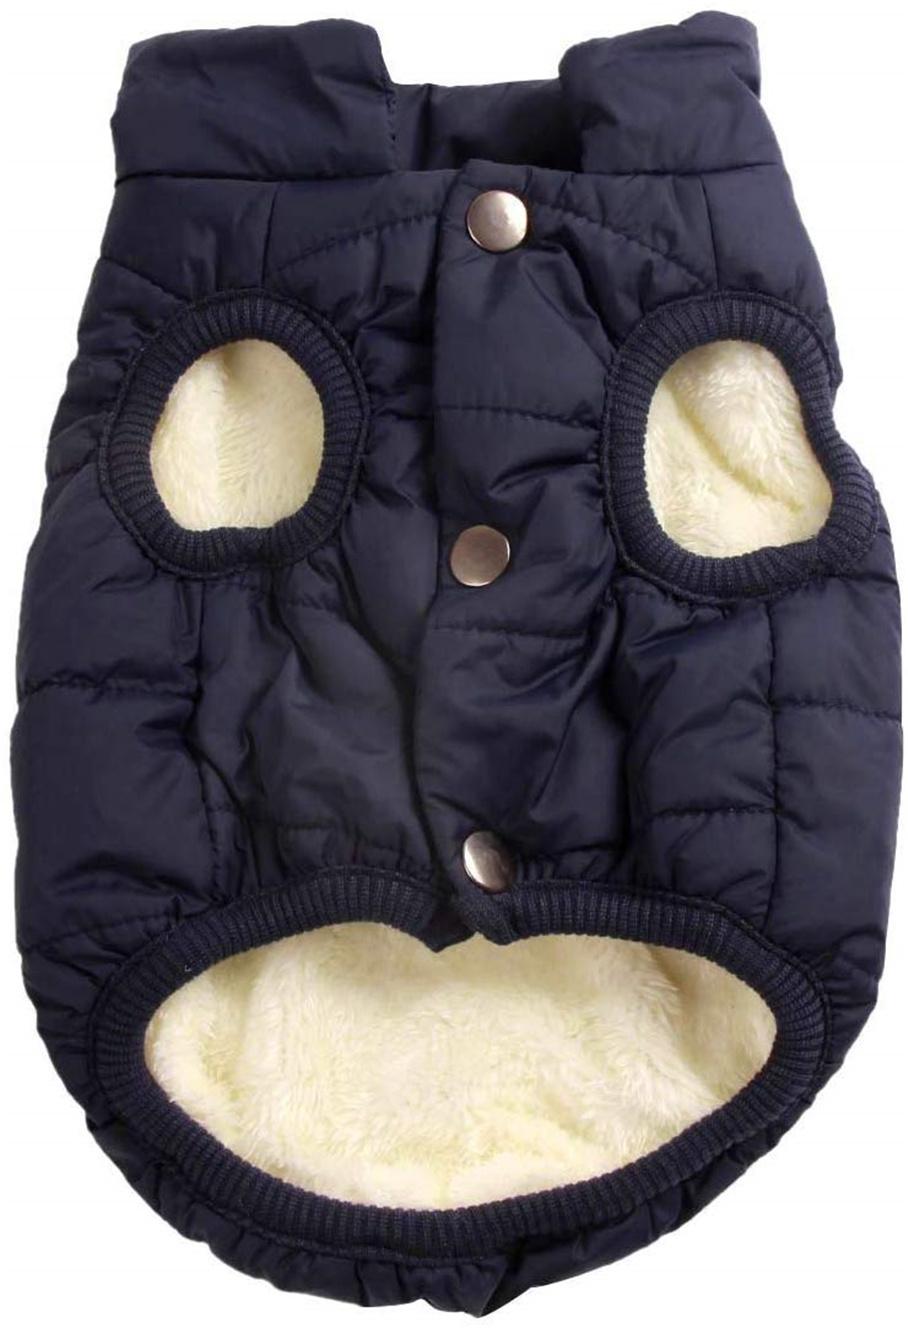 2 Layers Fleece Lined Warm Dog Jacket for Puppy